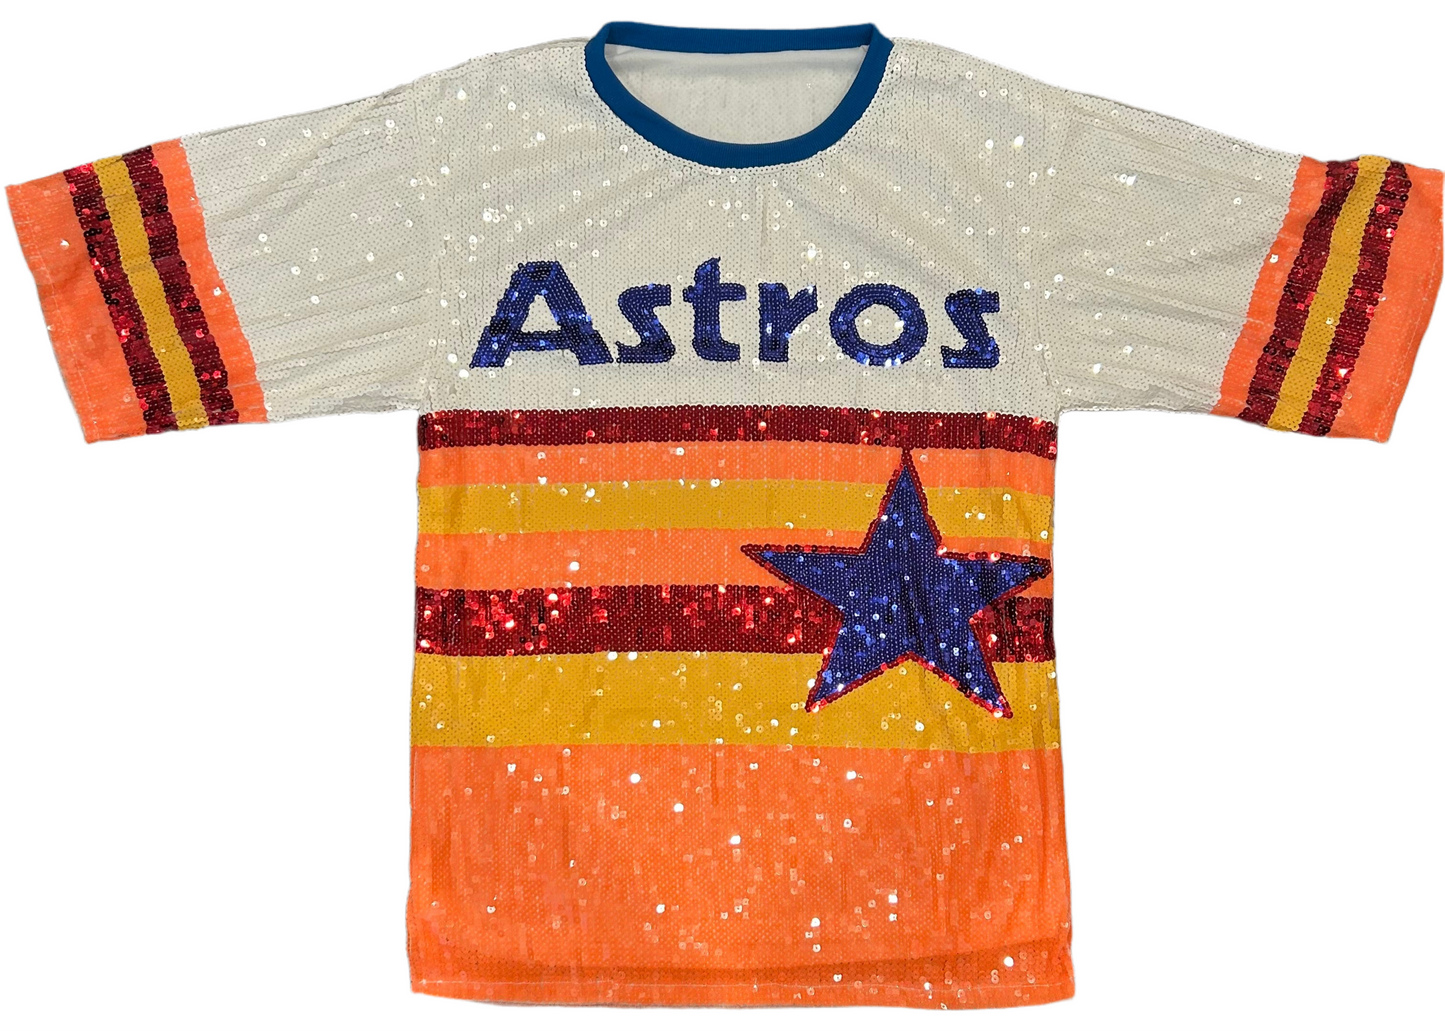 Astros 1 size fits most bling tee blue, retro & orange